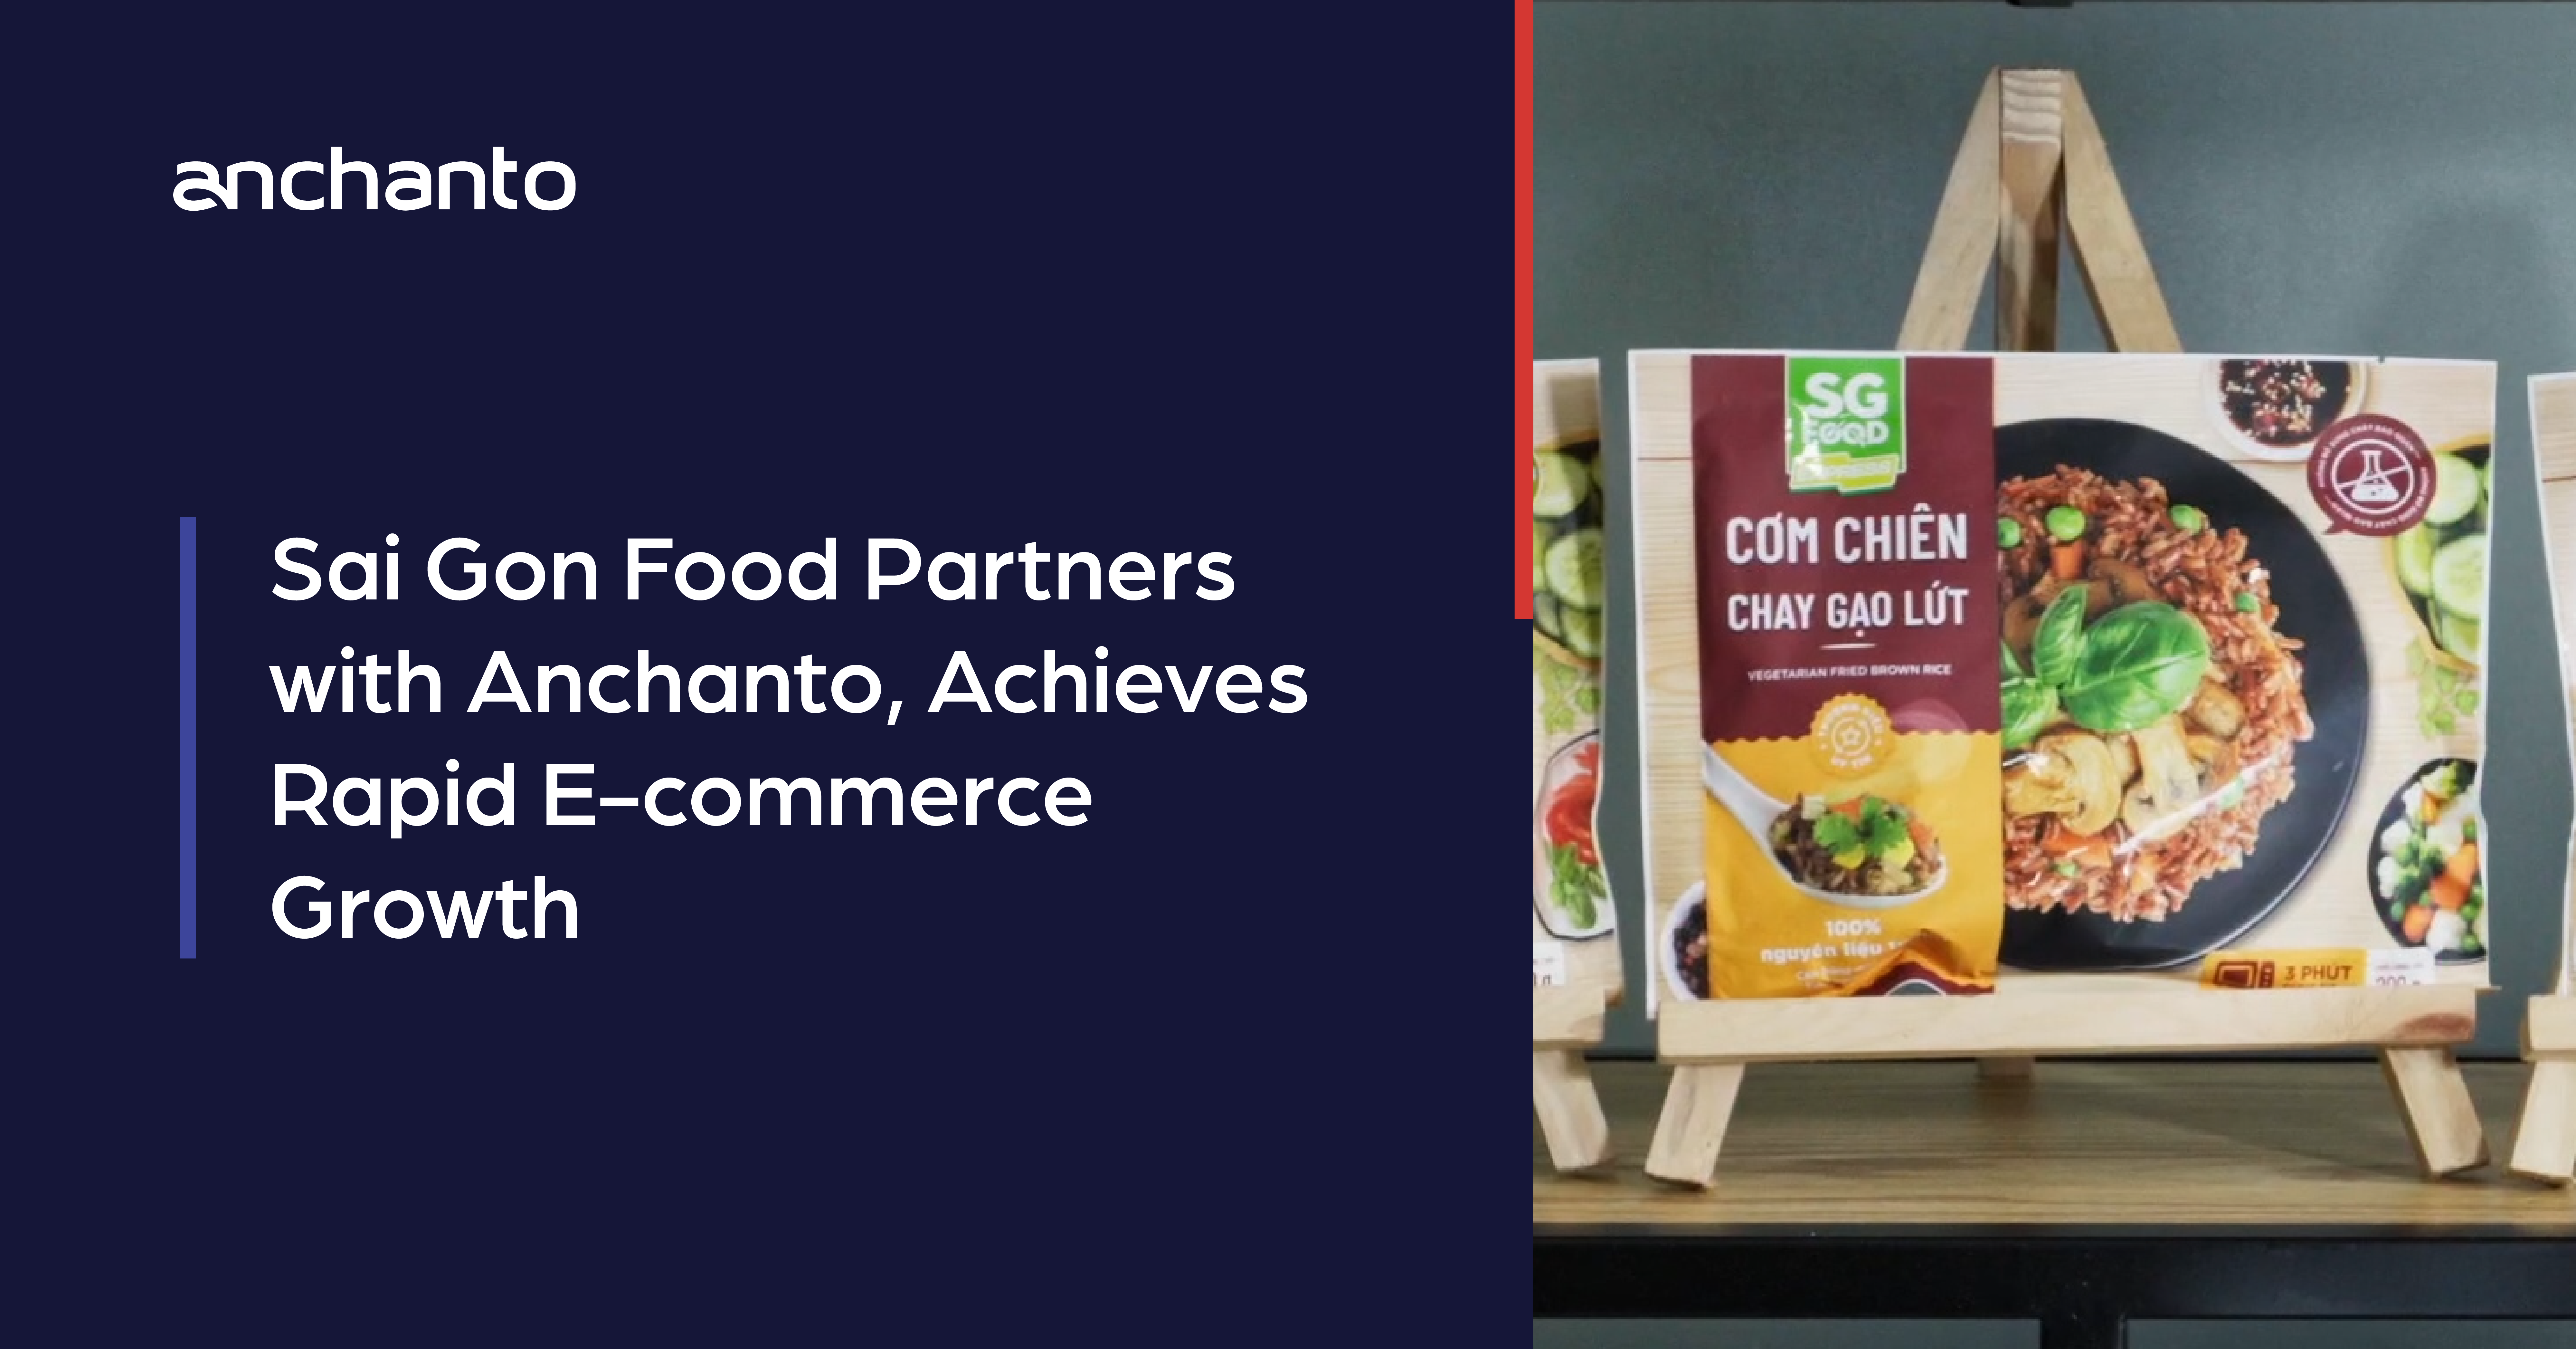 Leading Meal Manufacturer & Retailer Sai Gon Food Partners with Anchanto, Achieves Rapid E-Commerce Growth